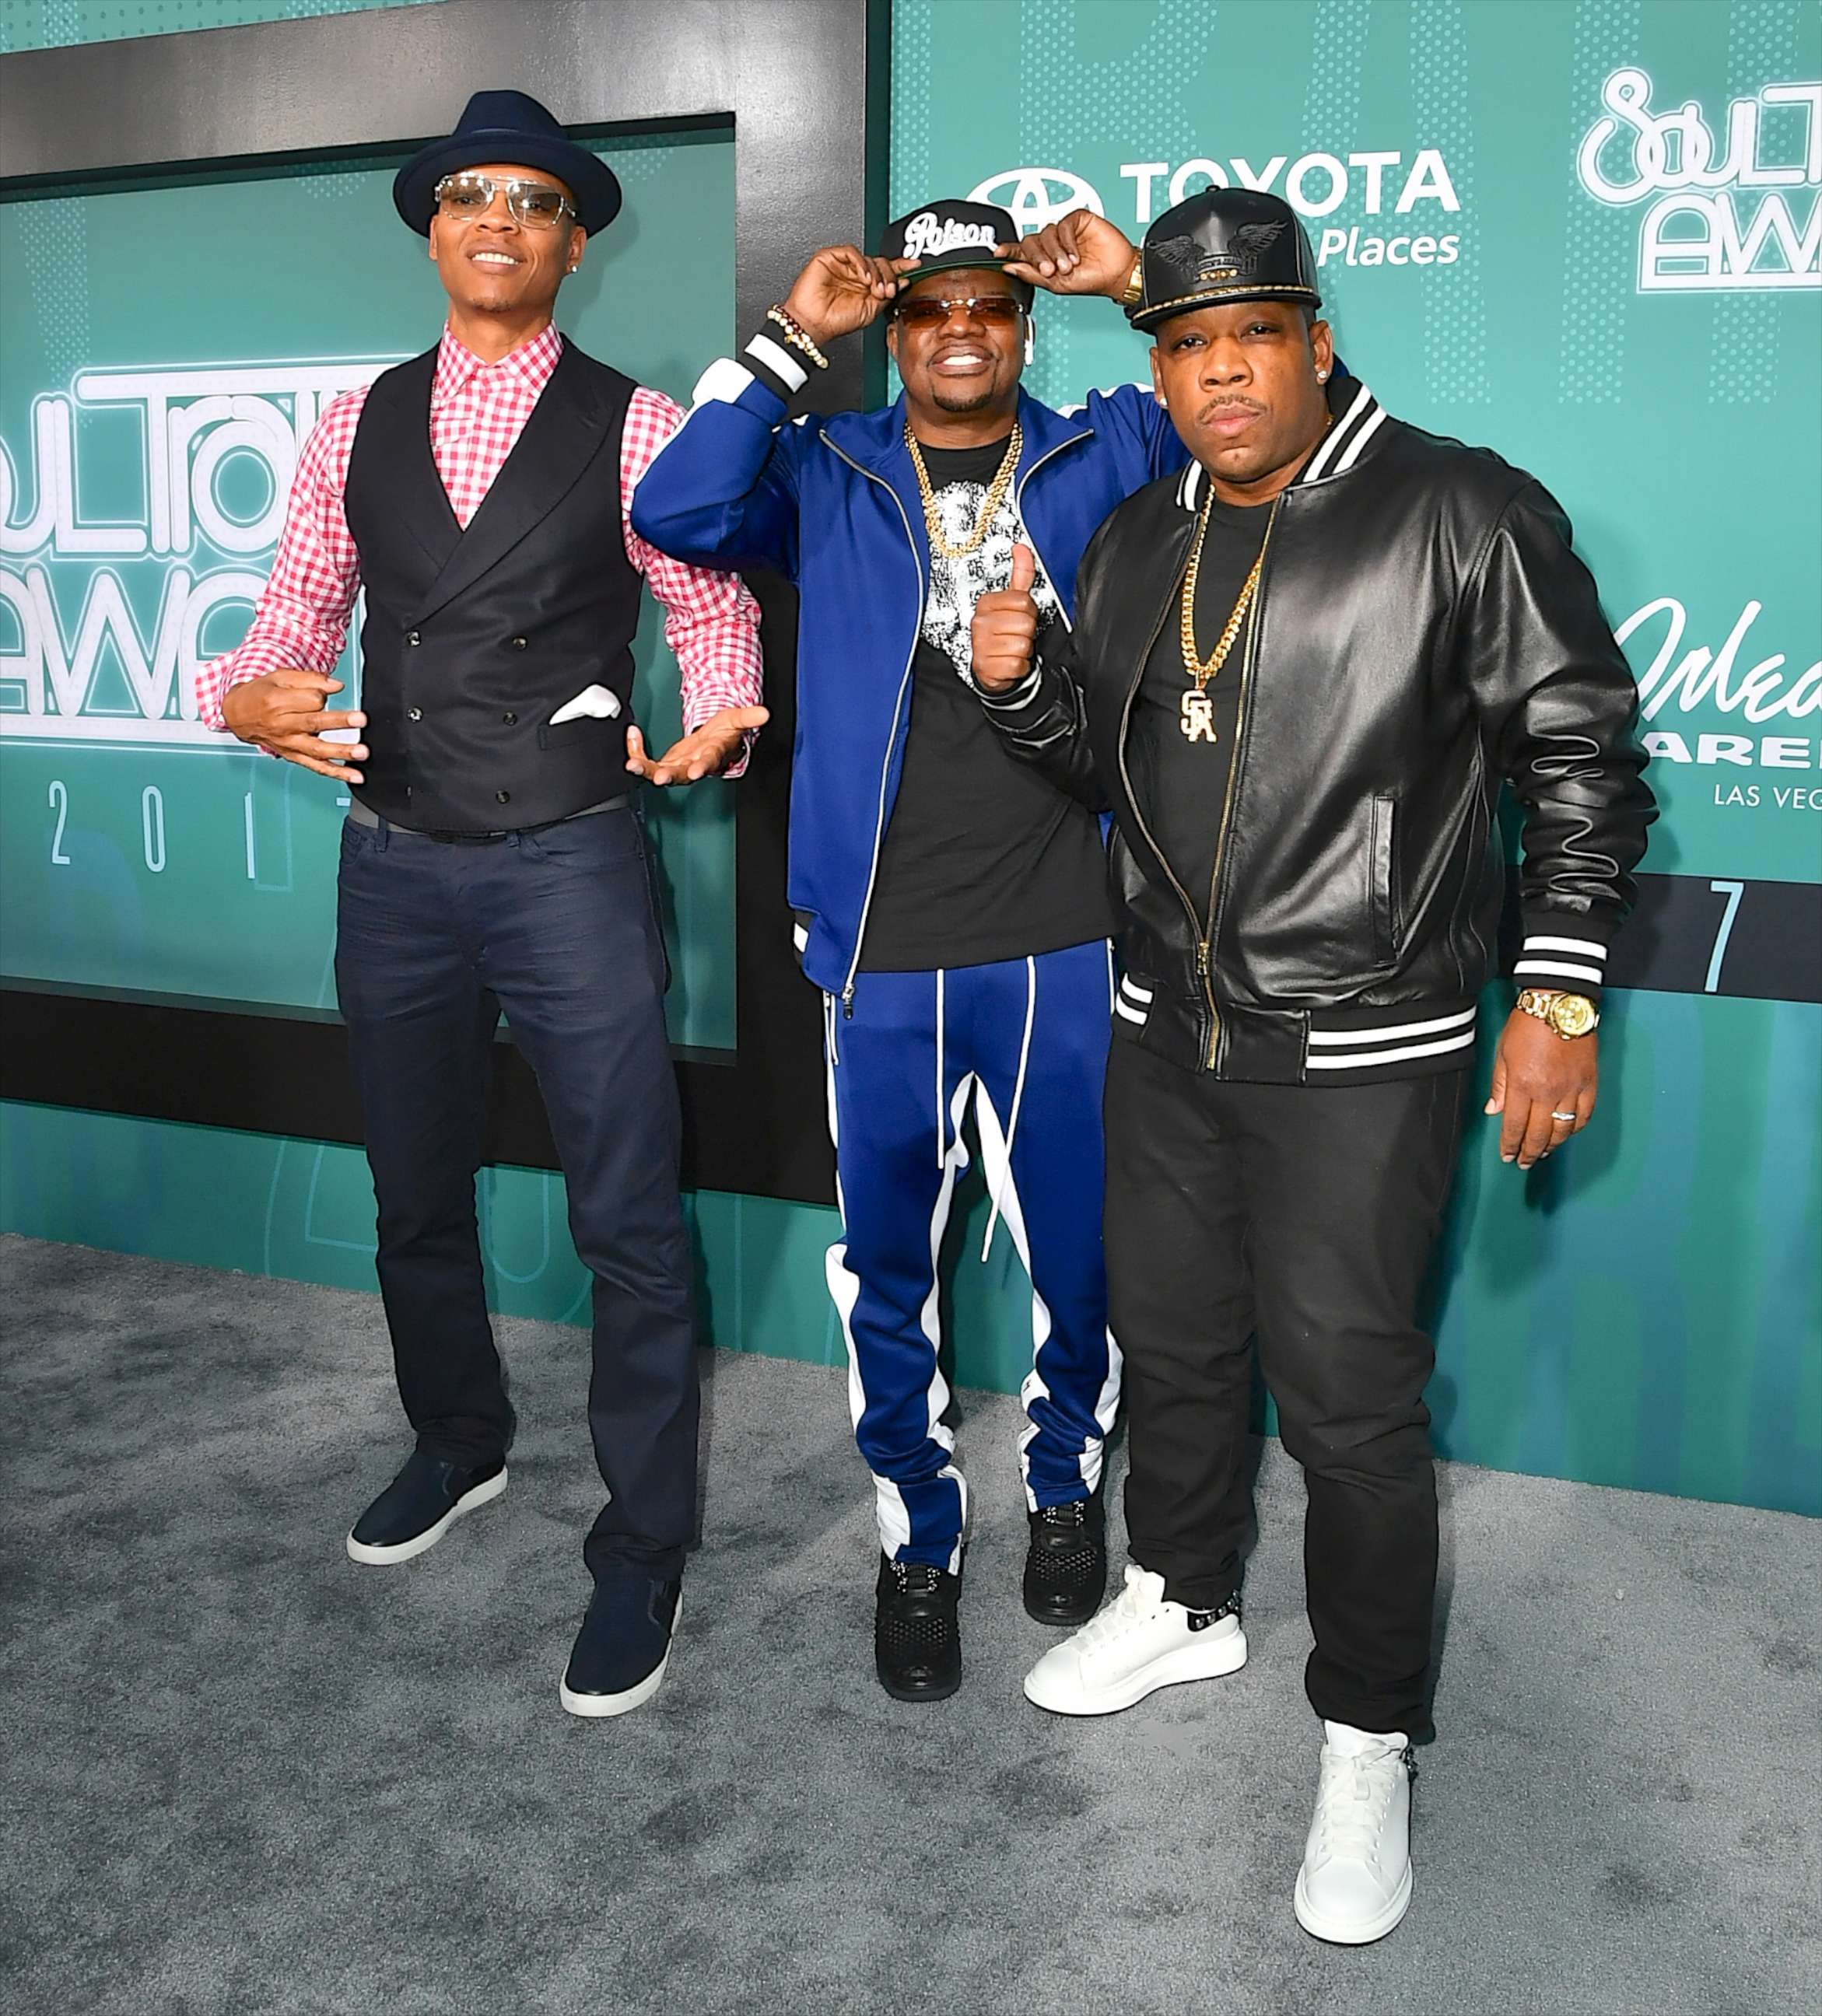 PHOTO: (L-R) Ronnie DeVoe, Ricky Bell and Michael Bivins of Bell Biv DeVoe attend the 2017 Soul Train Music Awards at the Orleans Arena on Nov. 5, 2017 in Las Vegas, Nevada. 